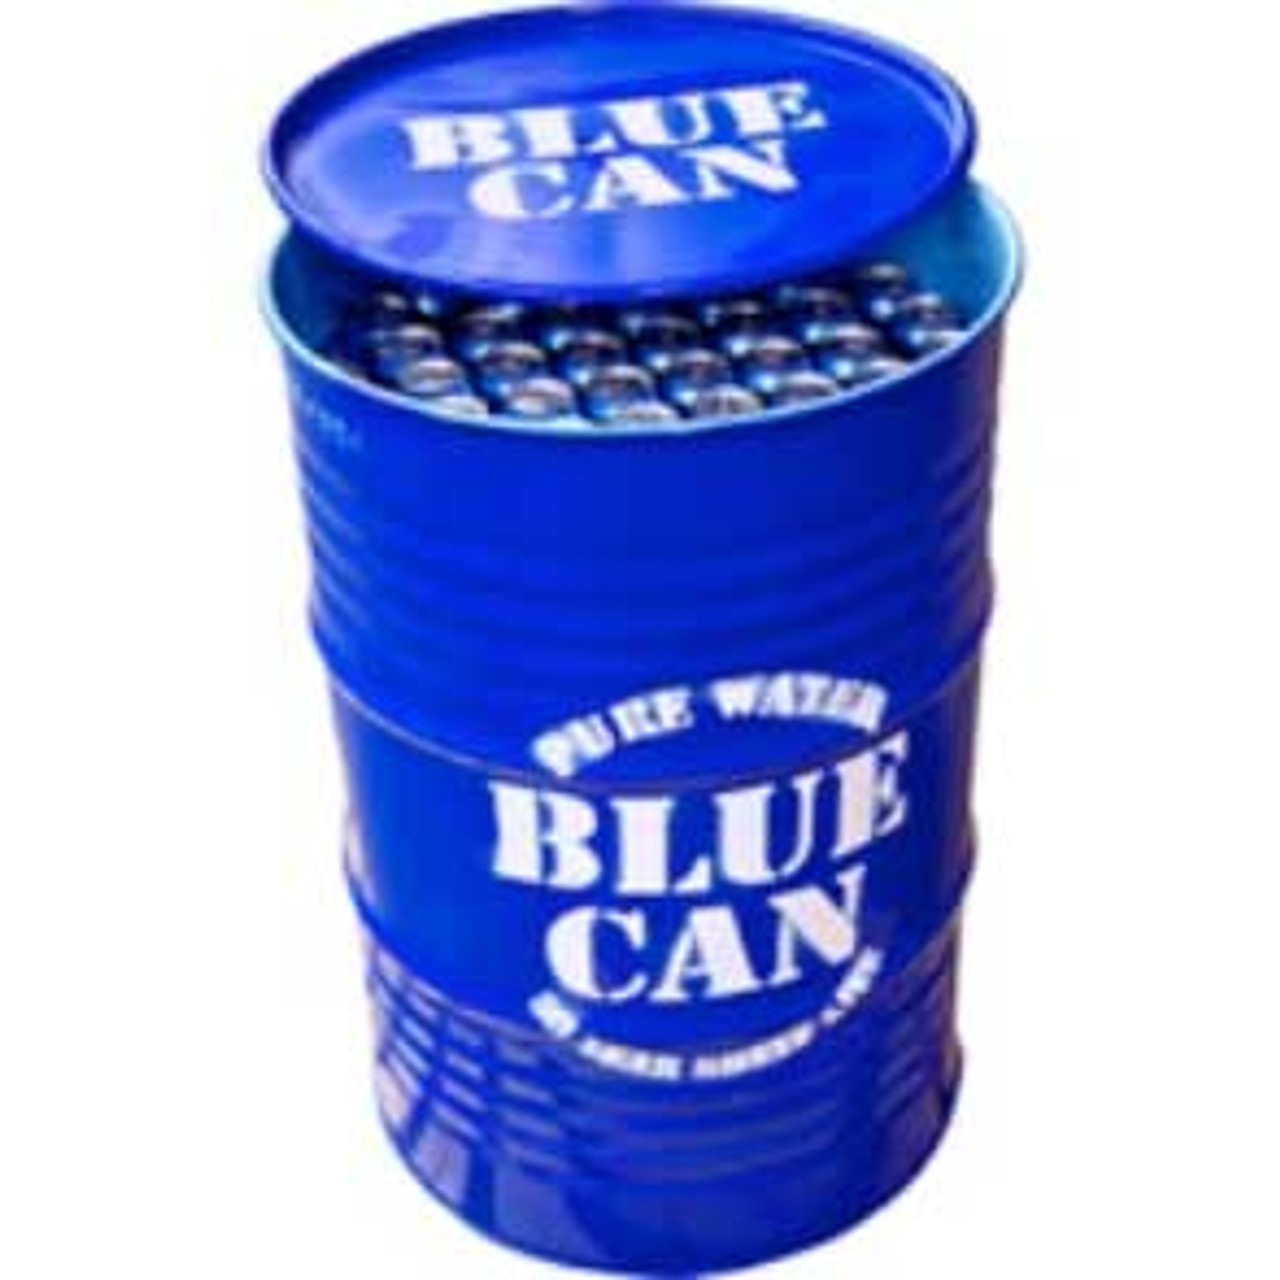 BLUE CAN Emergency Drinking Water- 12oz –